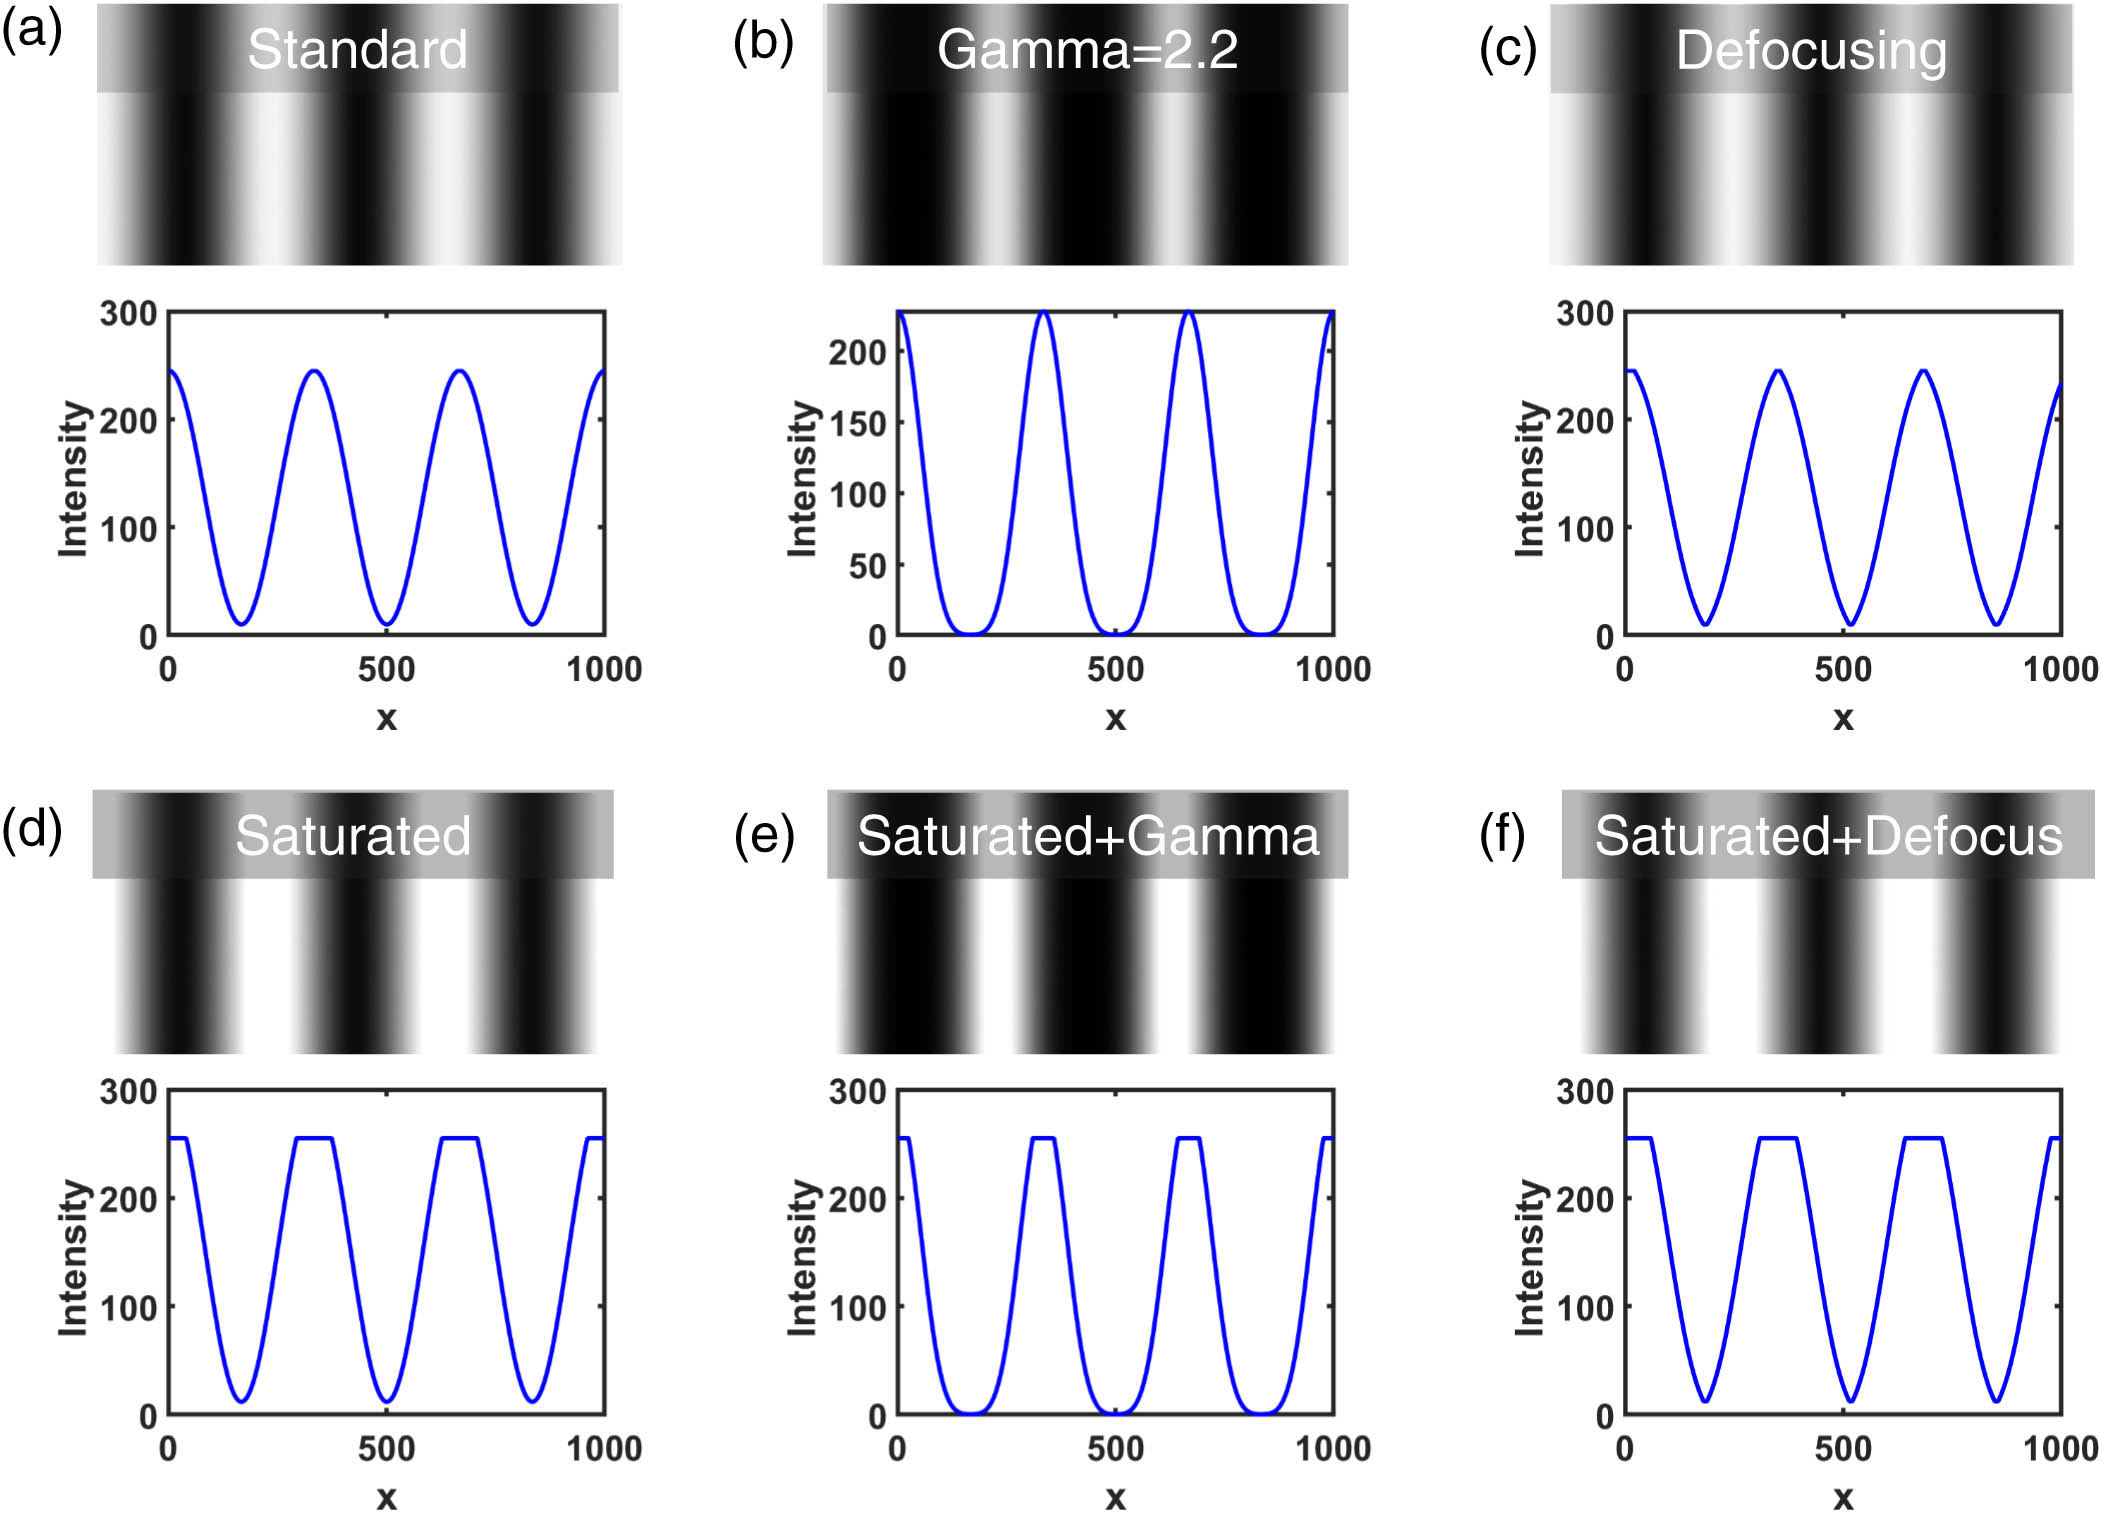 Simulated sinusoidal fringe images and their cross sections. (a) An ideal sinusoidal pattern. (b) A gamma-distorted sinusoidal pattern. (c) A defocused binary stripe image. (d) A saturated sinusoidal fringe image. (e) A fringe image affected by both the gamma distortion and the image saturation. (f) A fringe image affected by both the defocusing and the image saturation.